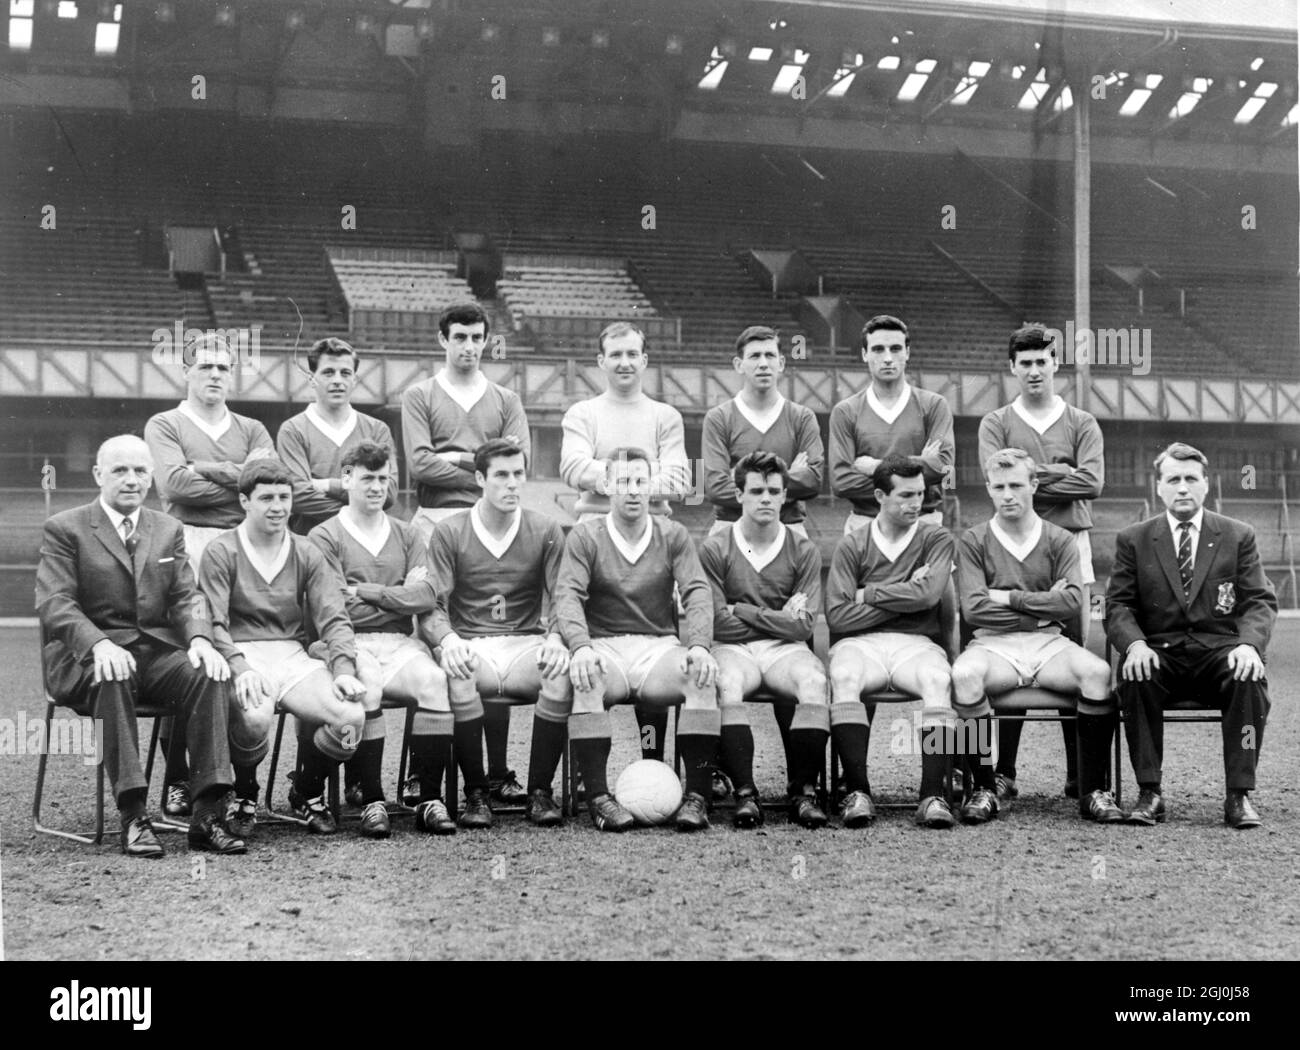 Glasgow Rangers Soccer Team. Back Row-Left to Right:Shearer, Caldow, Provan, Ritchie, Greig, Mckinnon, and Baxter. Front Row-Left to Right: Manager Scot Symon, Henderson, McMillan, McLean, Millar, Forrest, Brand, Wilson and trainer David Kinnear. 21st April 1964. Stock Photo